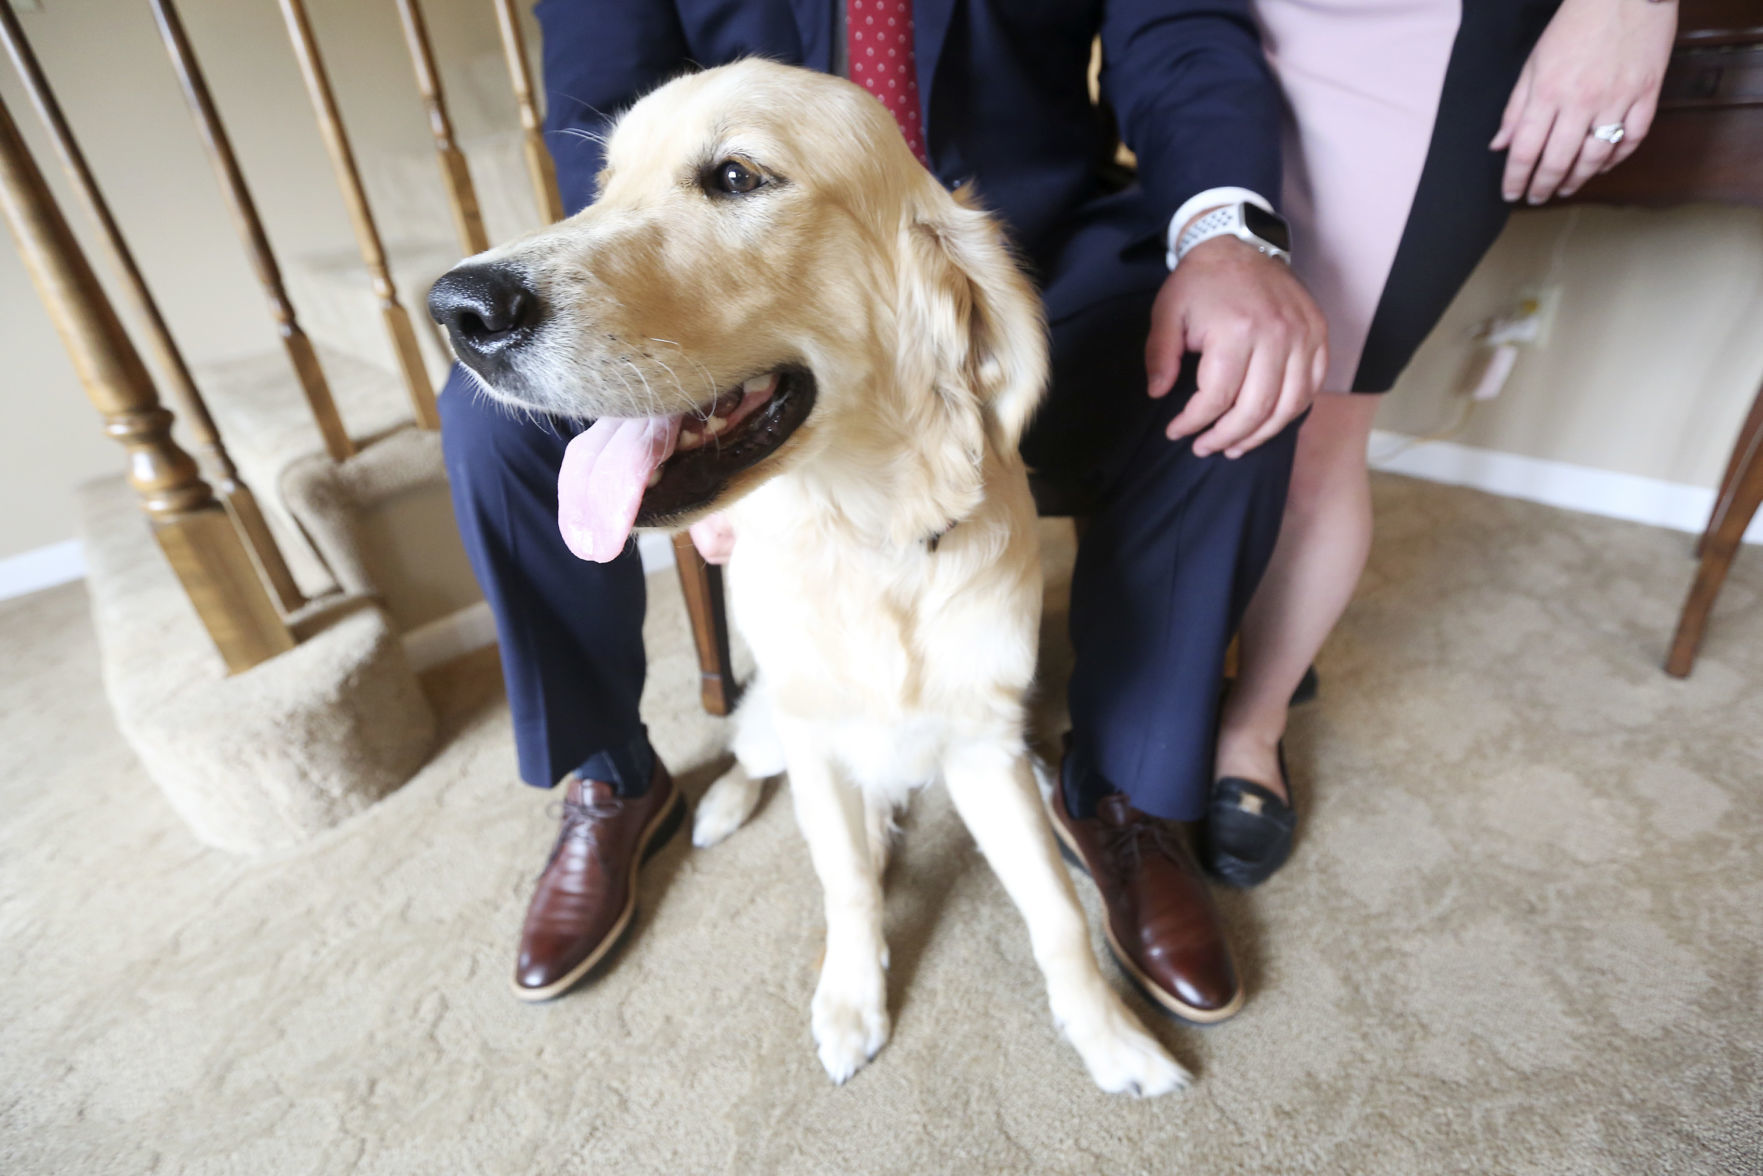 Stanley, an English golden retriever, comes to Hoffmann Schneider & Kitchen Funeral Home and Cremation Service in Dubuque to provide stress relief for employees and customers. Photo taken on Friday, June 19, 2020. PHOTO CREDIT: NICKI KOHL